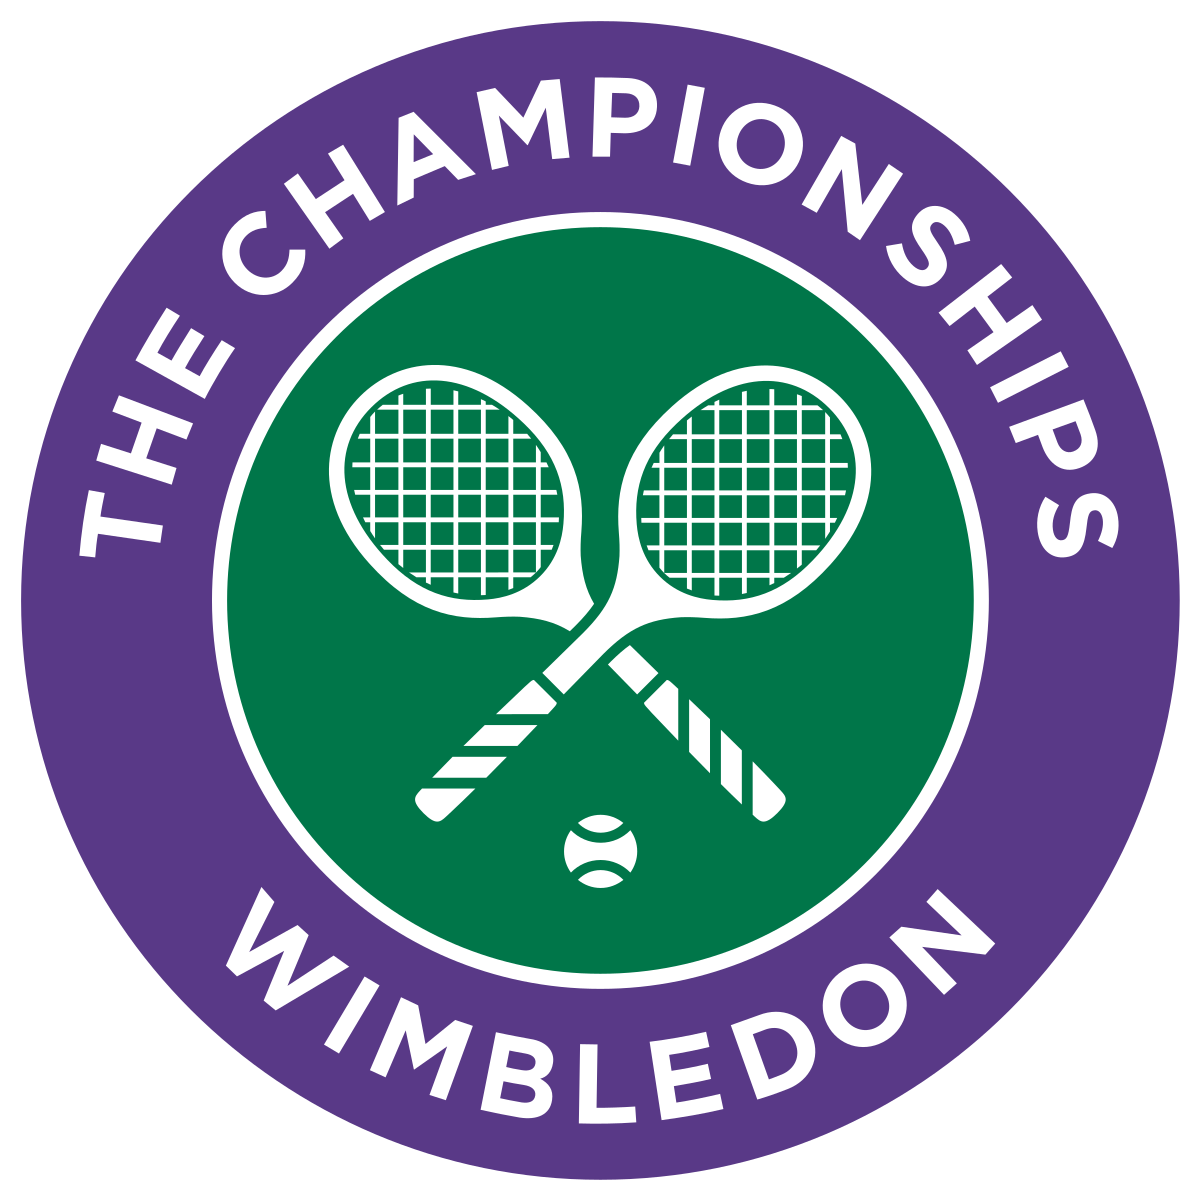 communications-manager-wimbledon-isportconnect